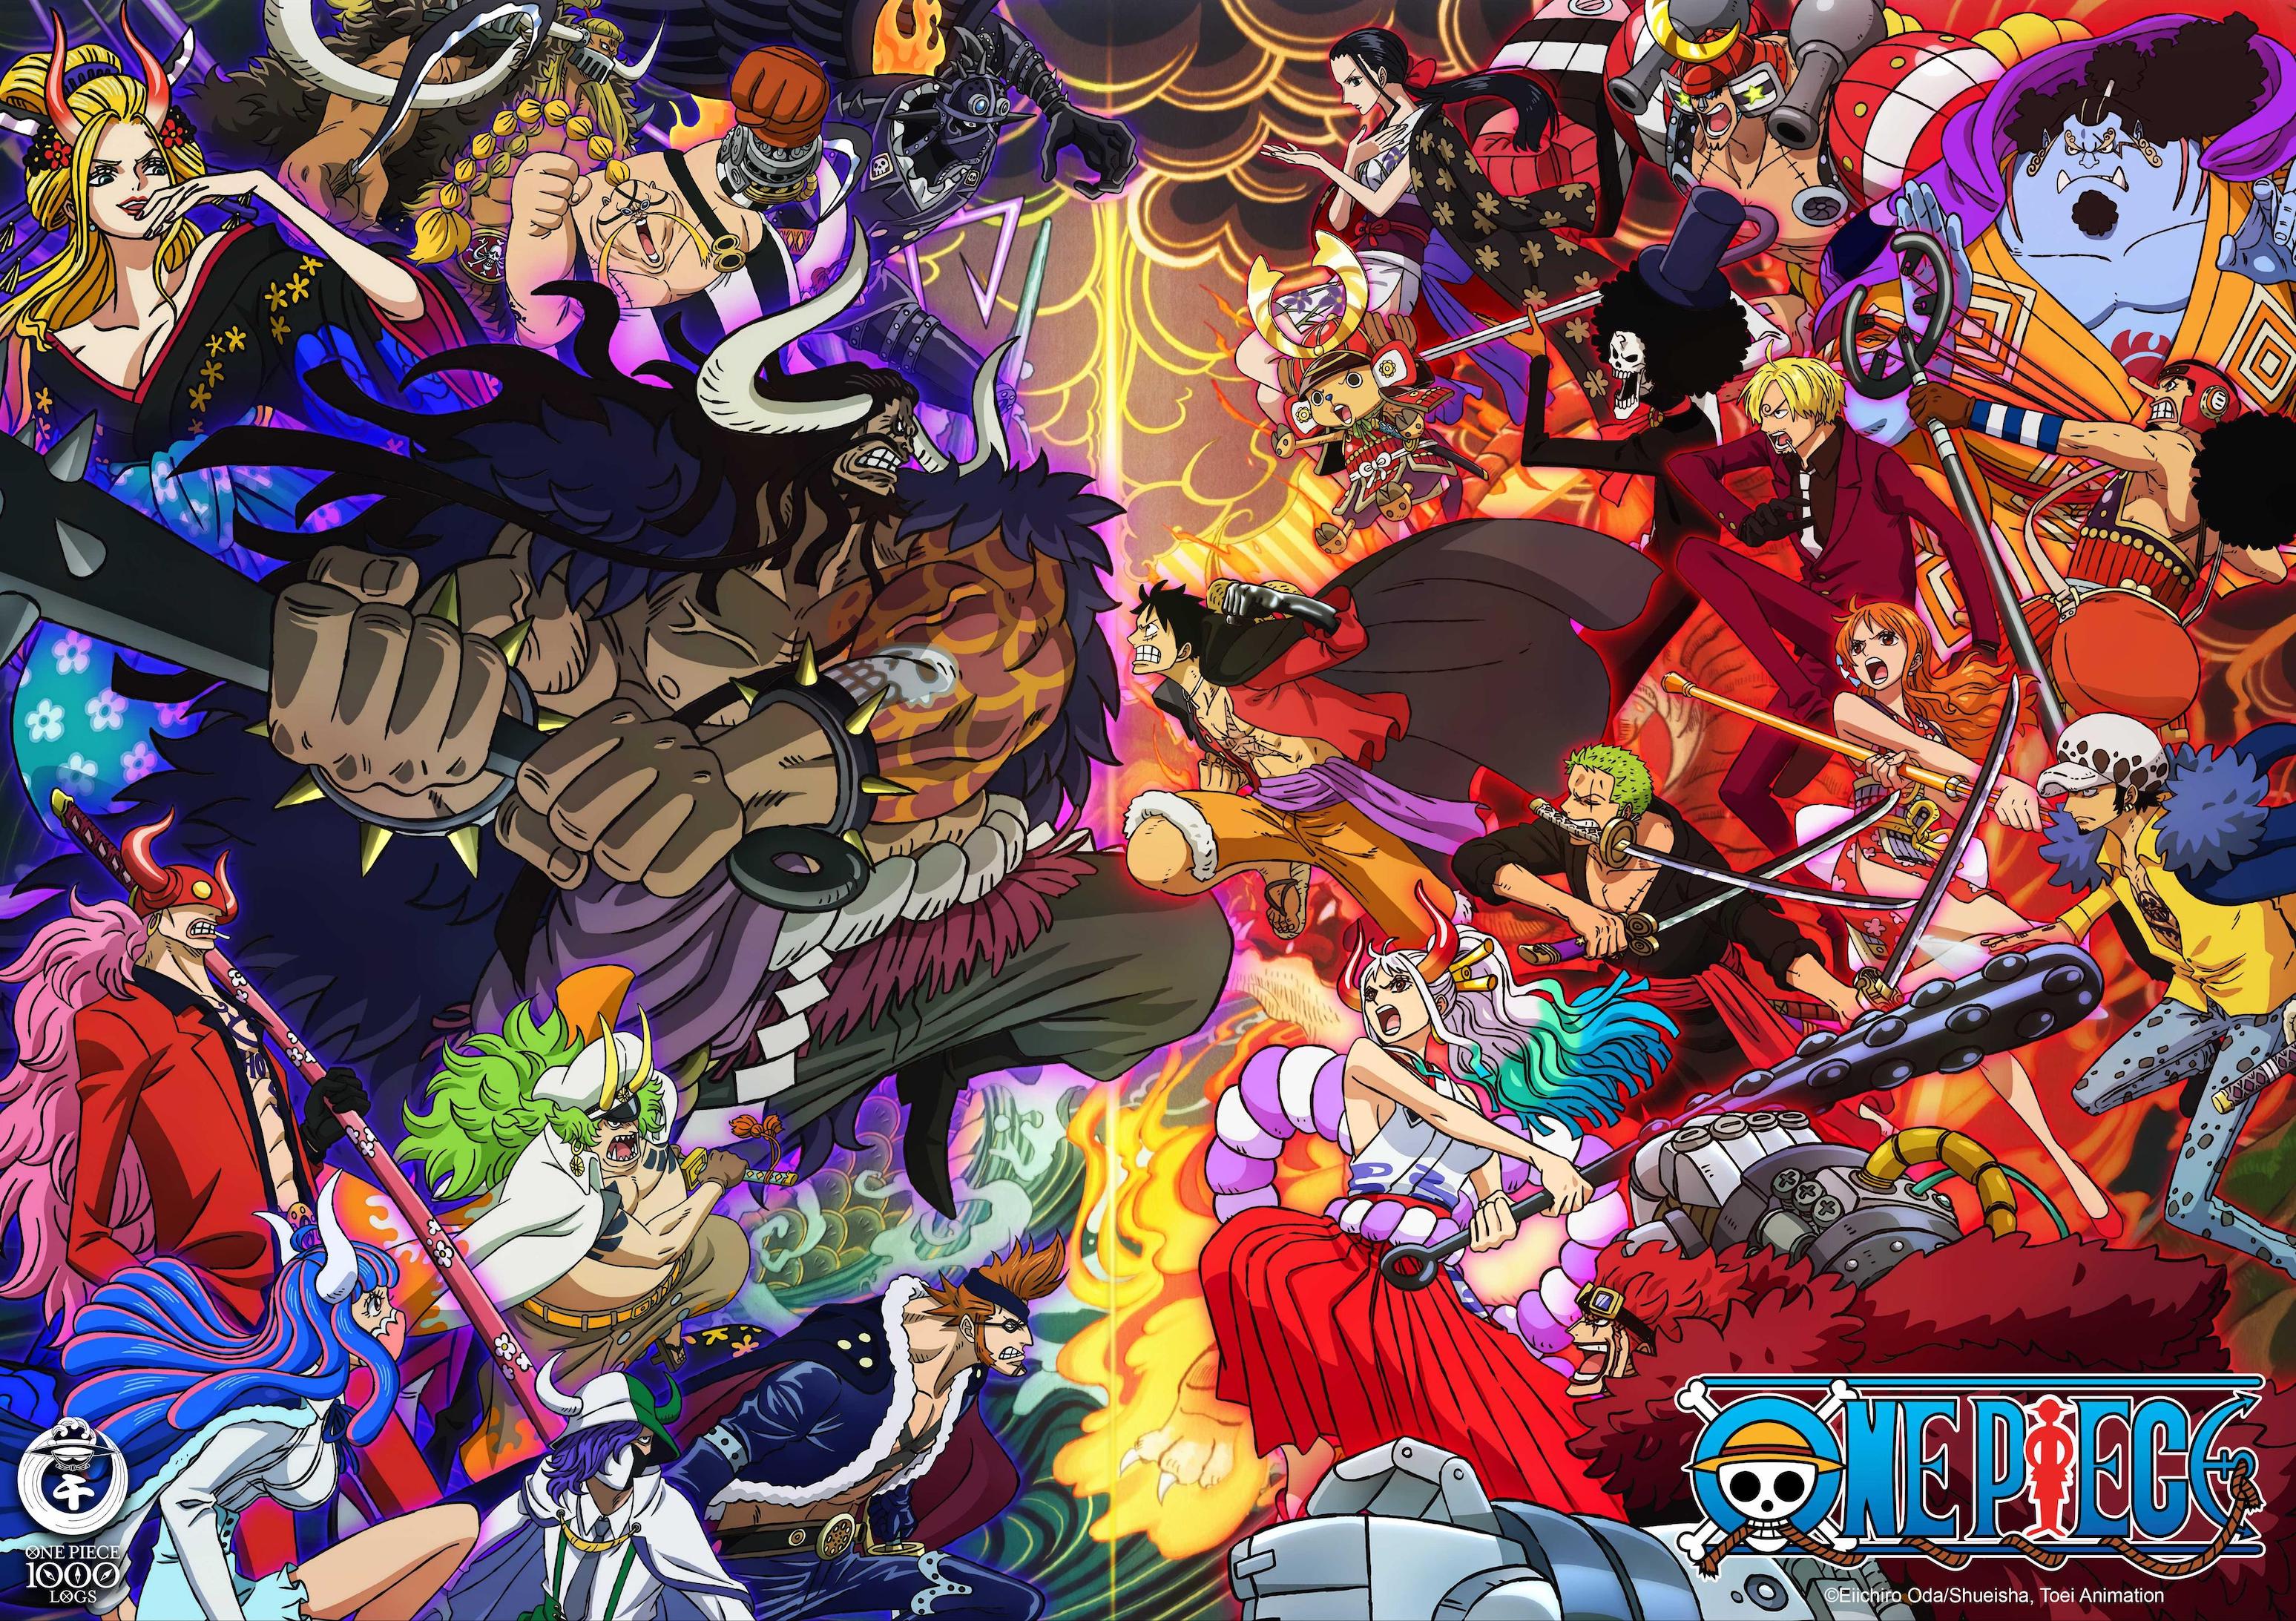 'One Piece' 1049 spoilers reveal that the major battle between Luffy and Kaido will finally come to a conclusion